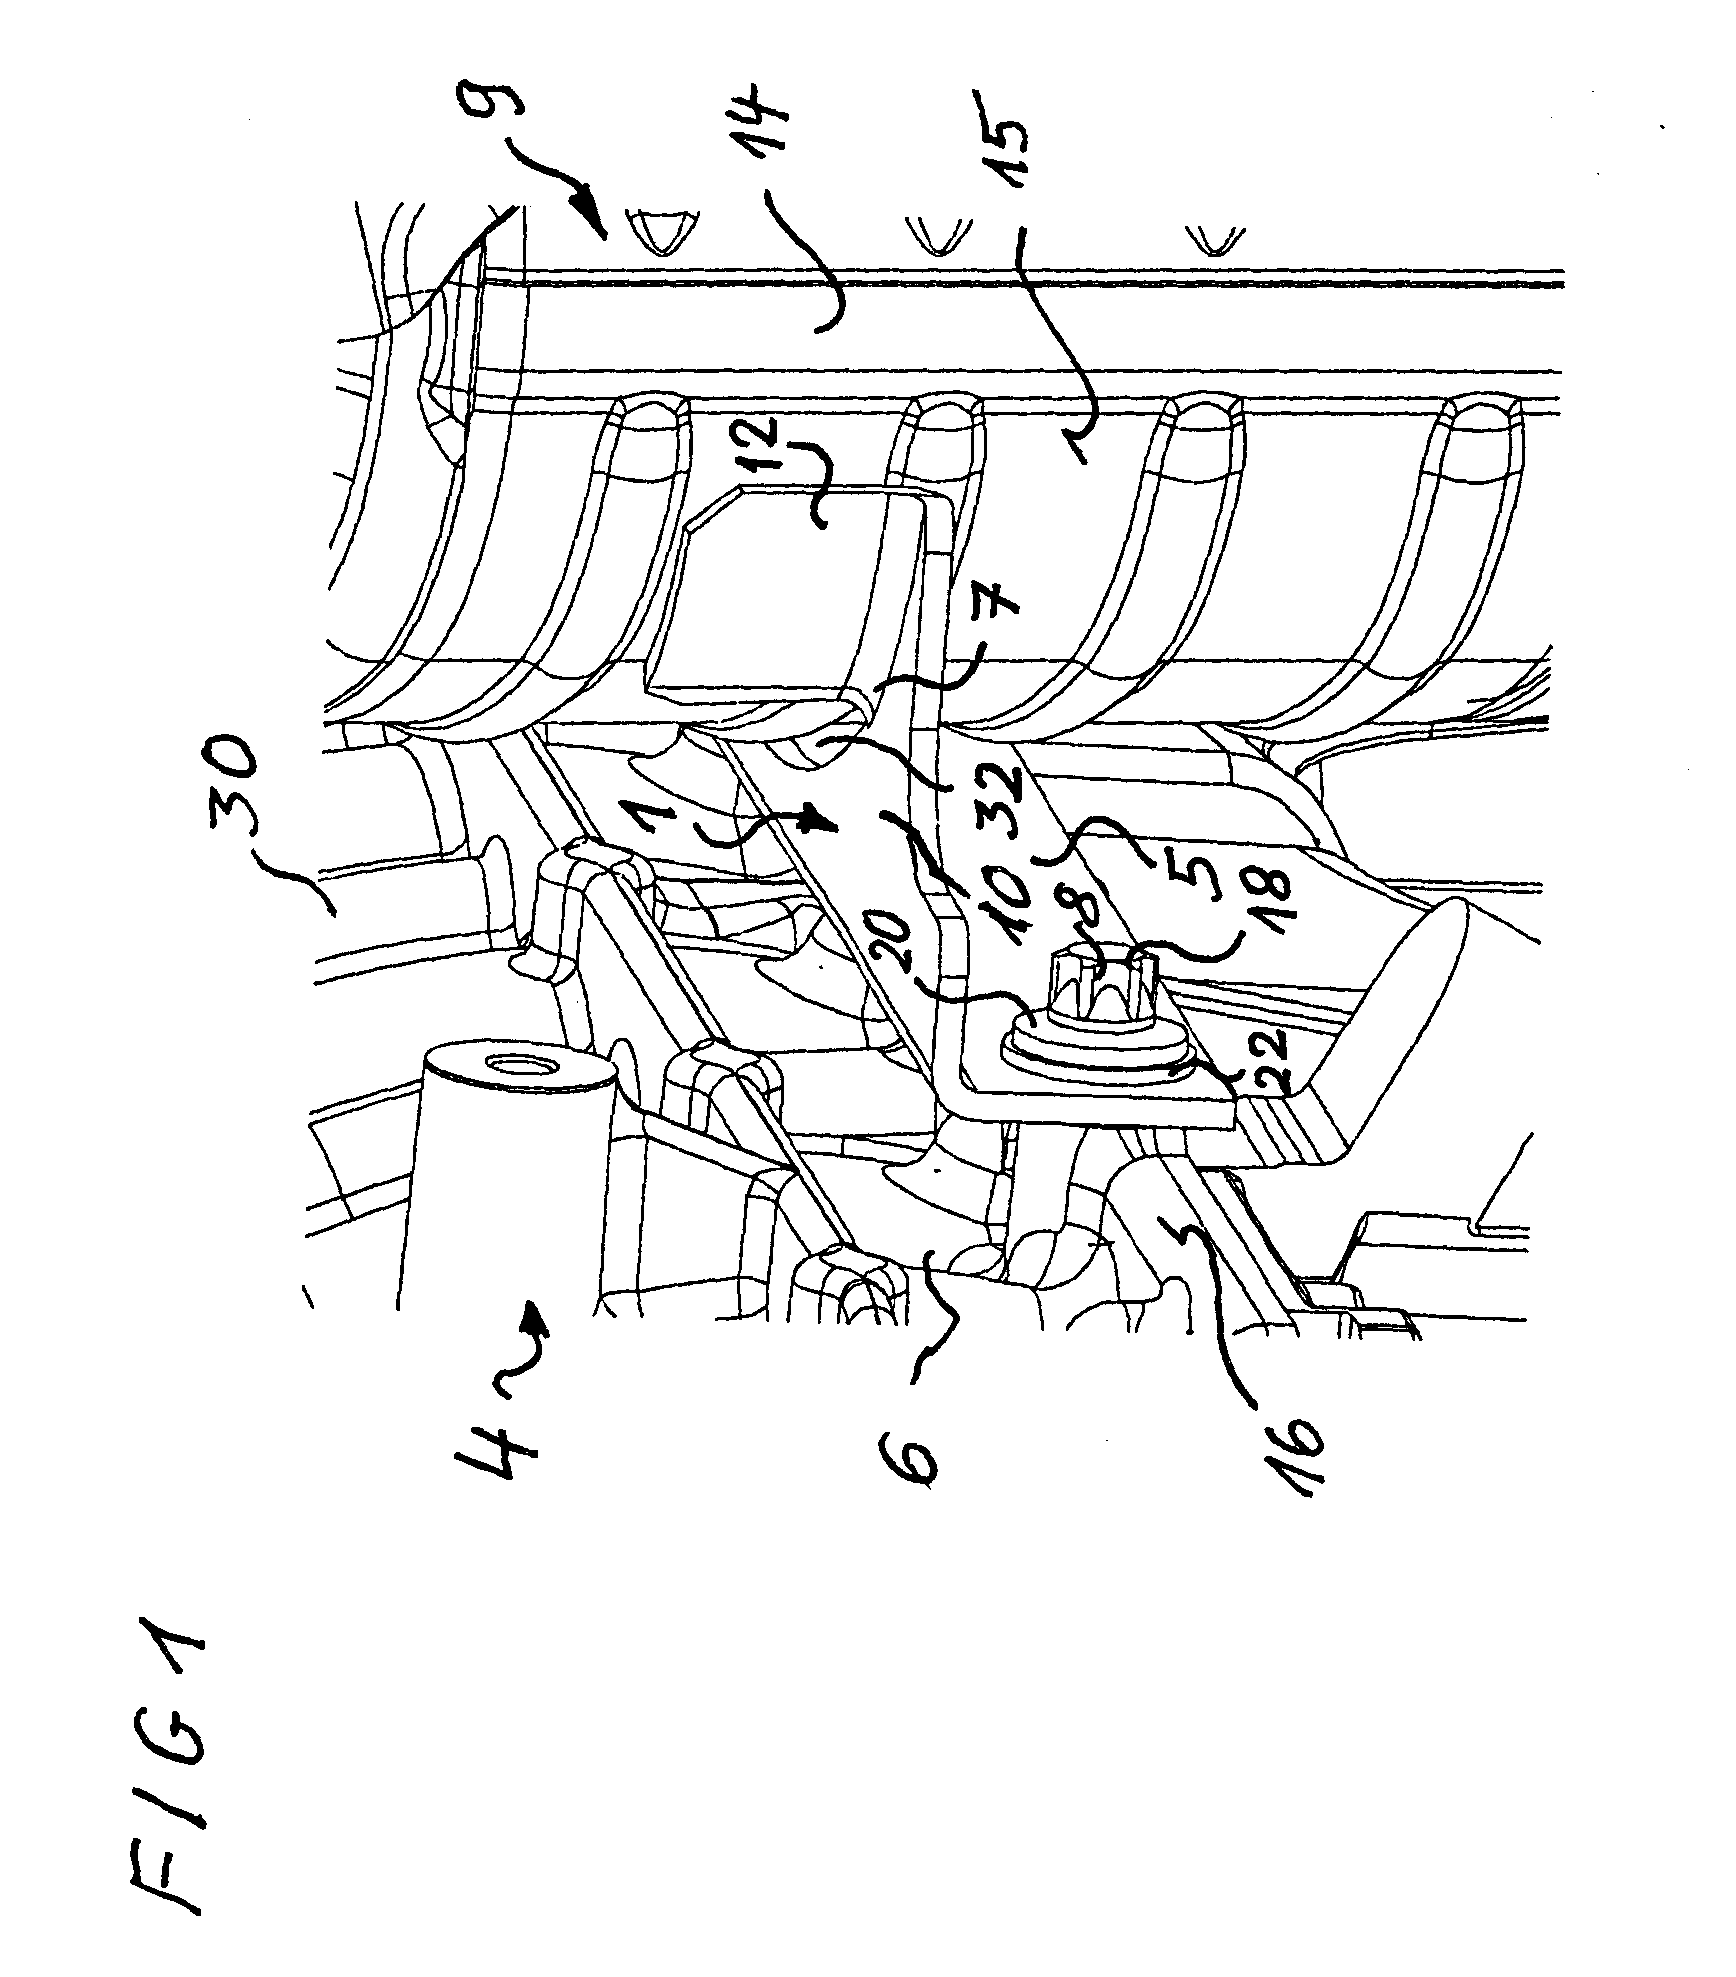 Catalytic converter fastening for a combustion engine